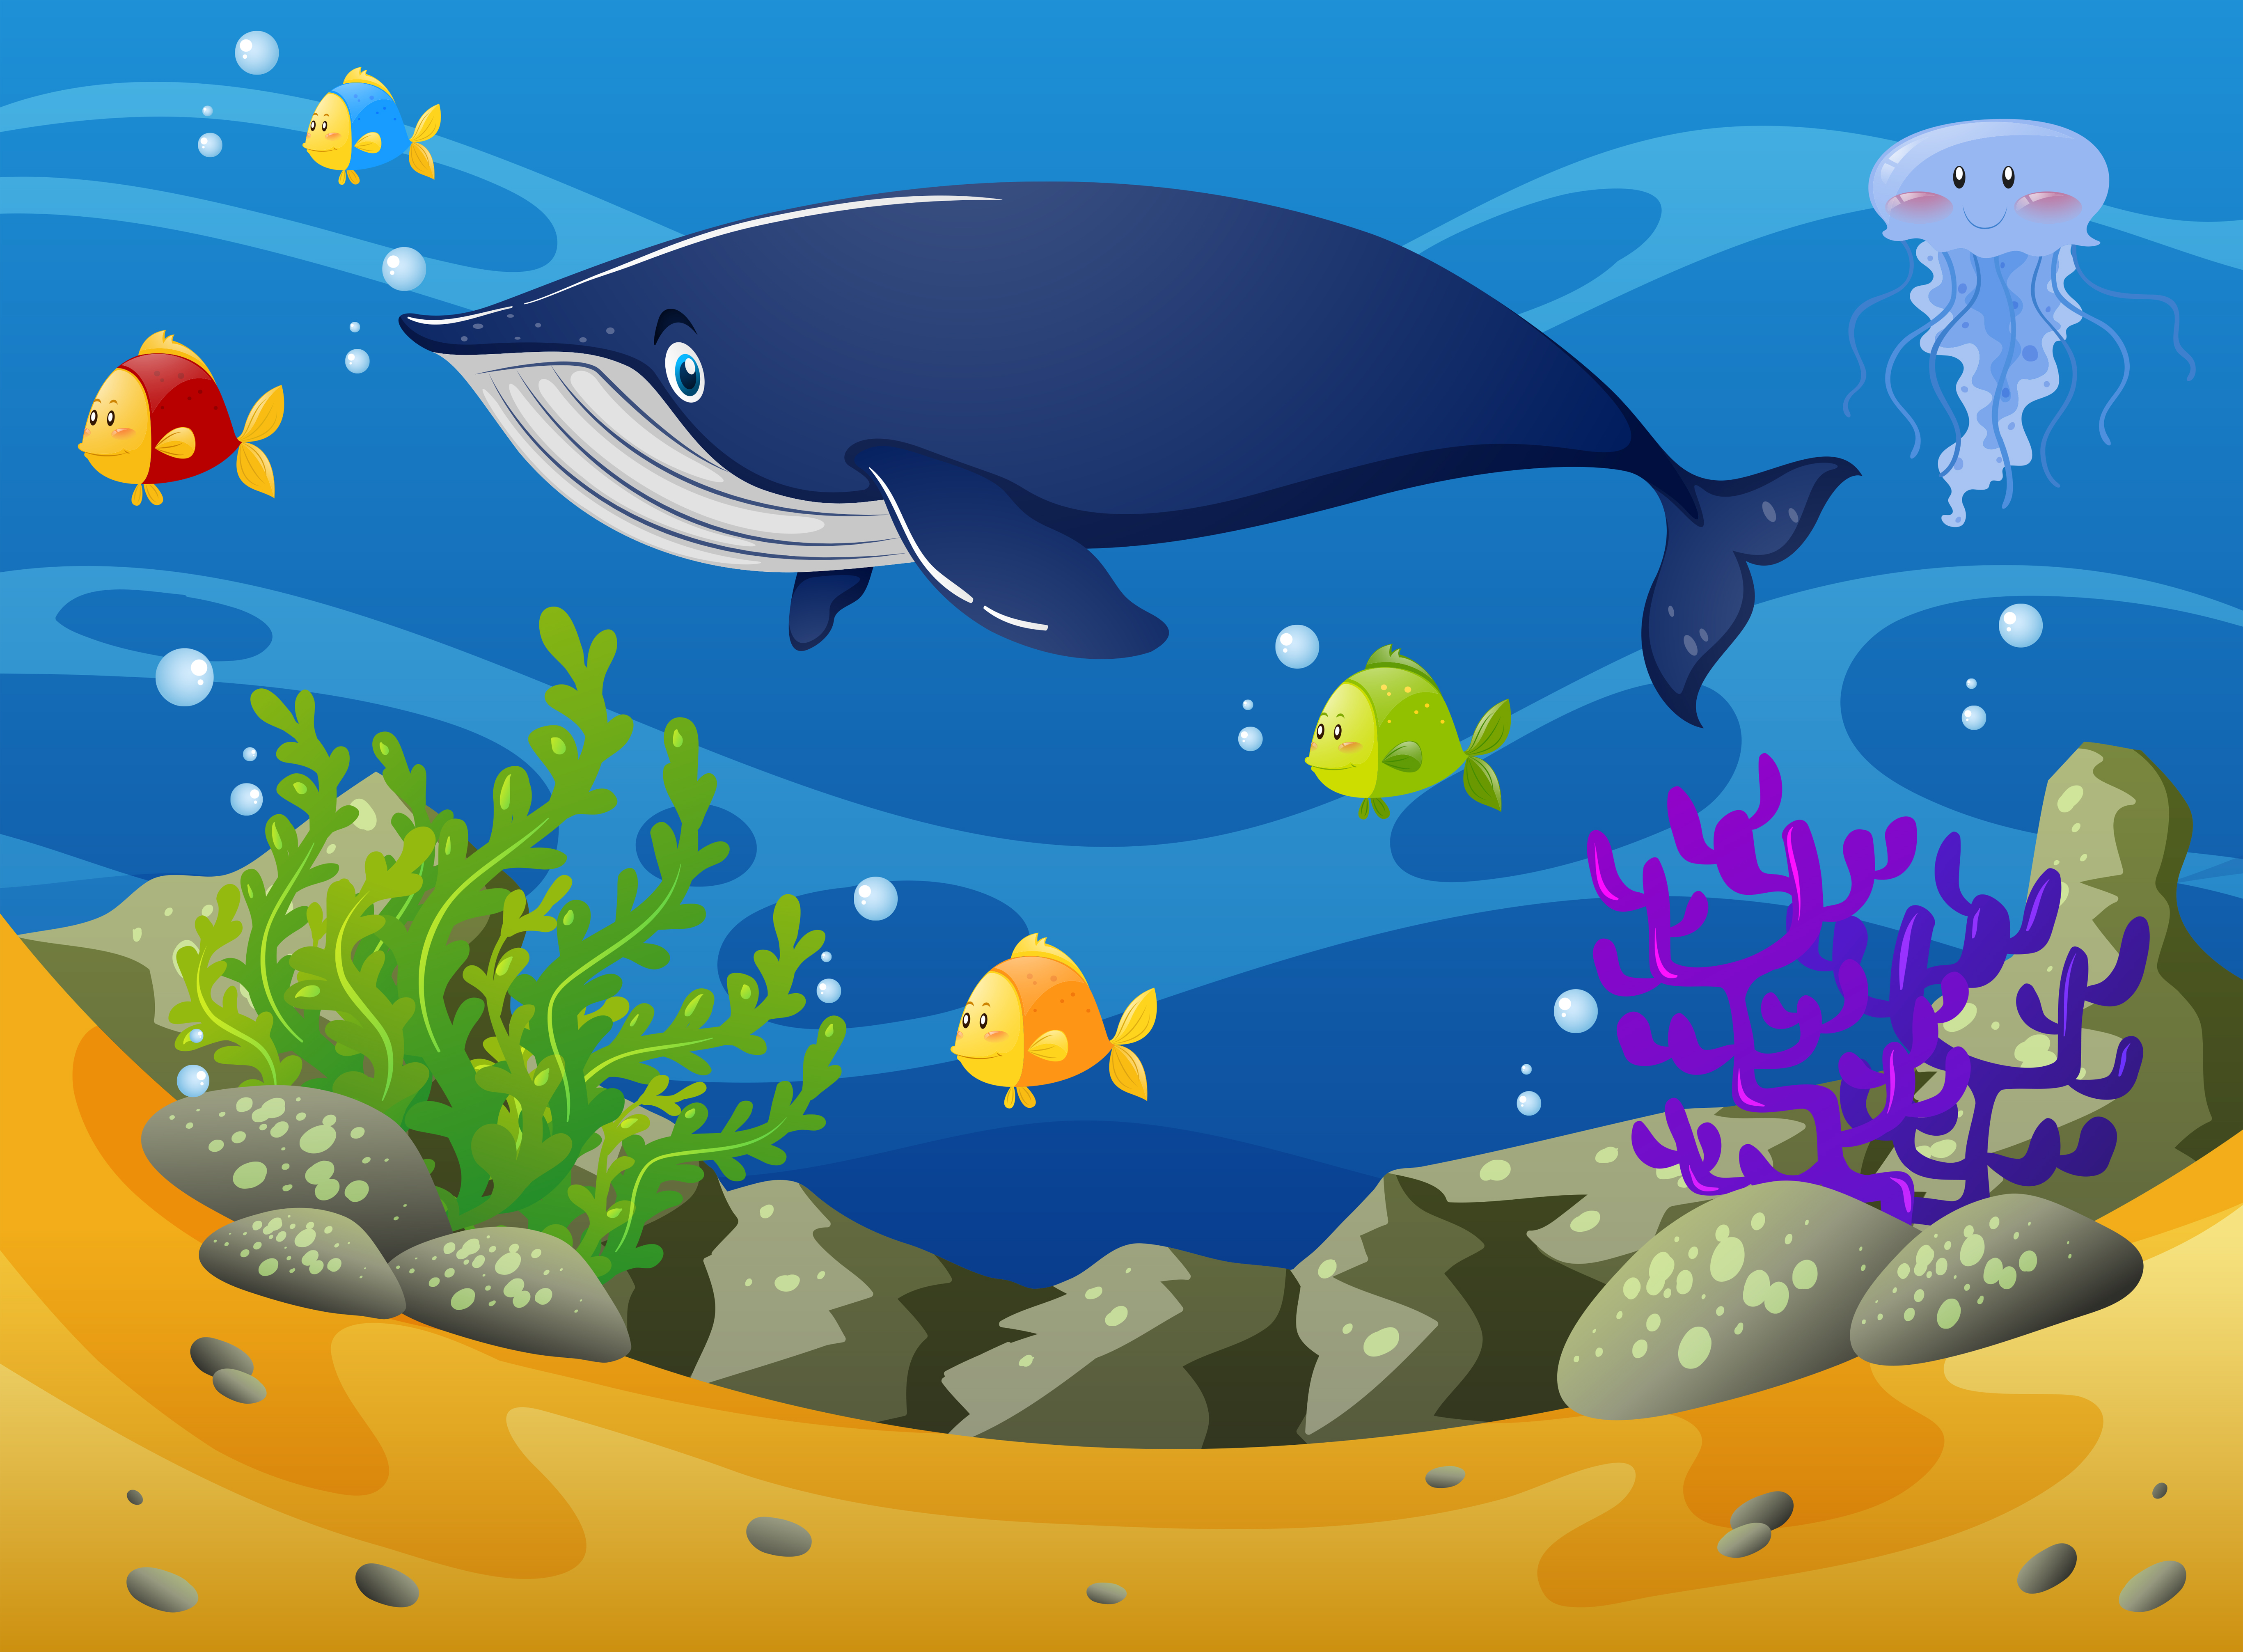 Whale And Little Fish Under The Sea Download Free Vectors Clipart Graphics Vector Art